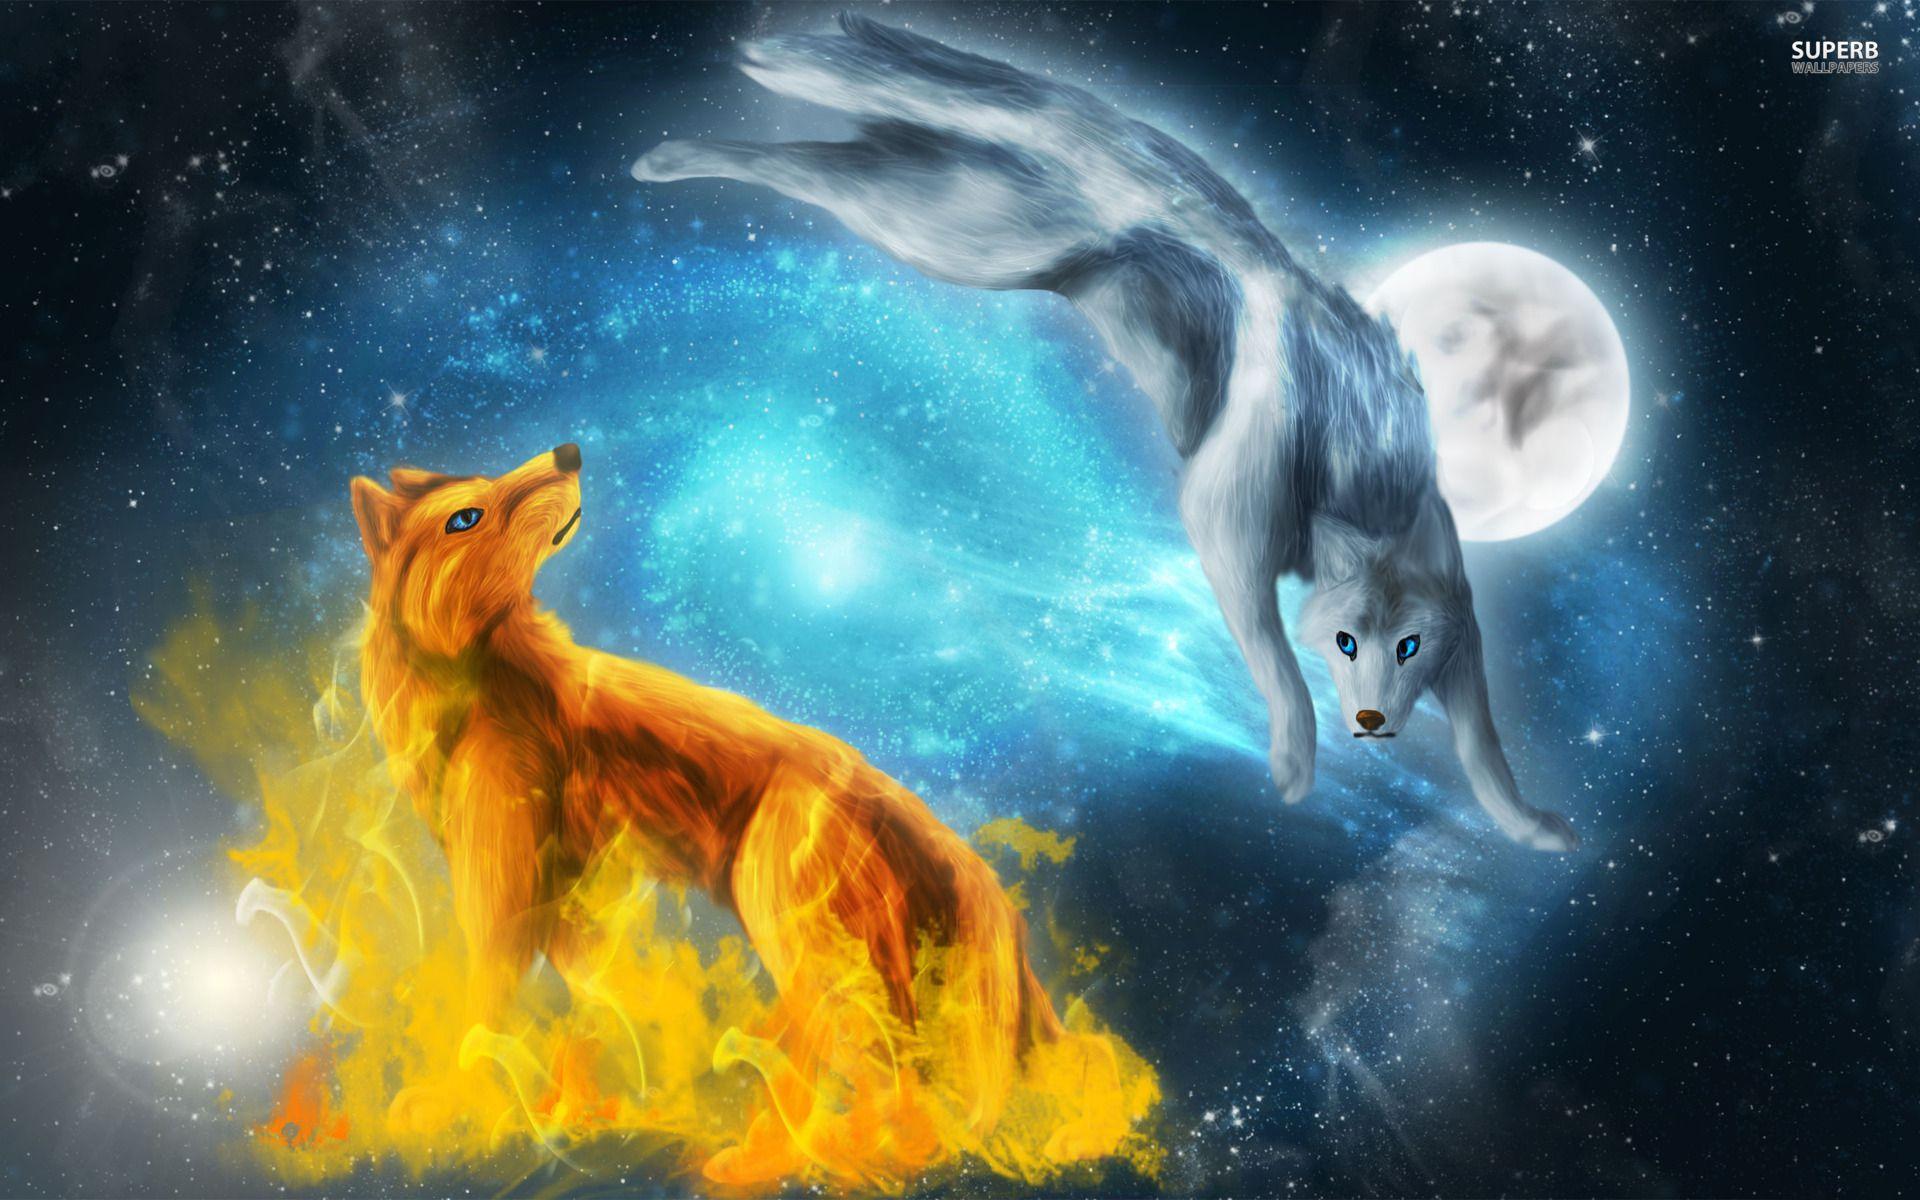 image about Wolves Gray wolf, Wallpaper 1920x1200